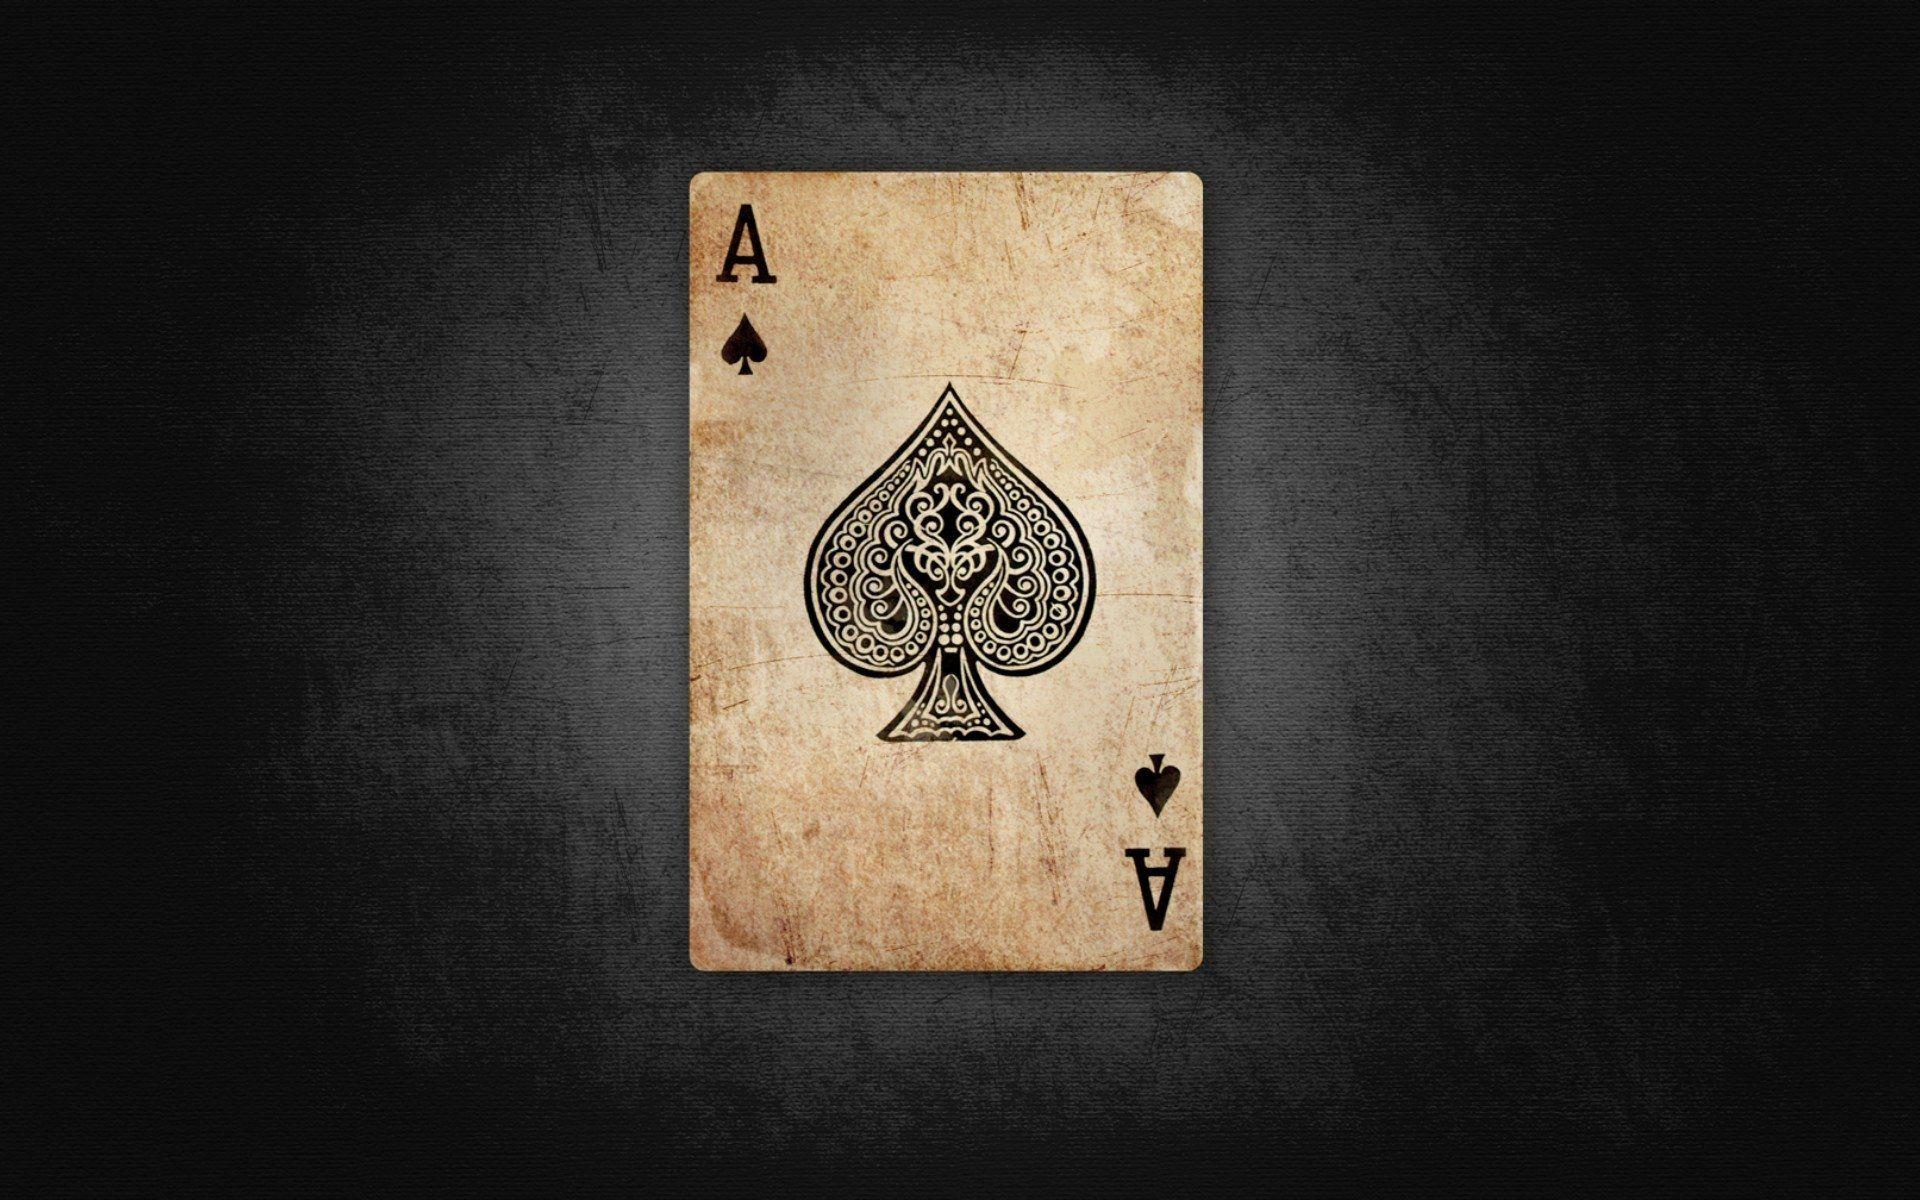 Image of Deck of cards  In black background  Ace of spades  Joker card  Cards  wallpaper EW713637Picxy